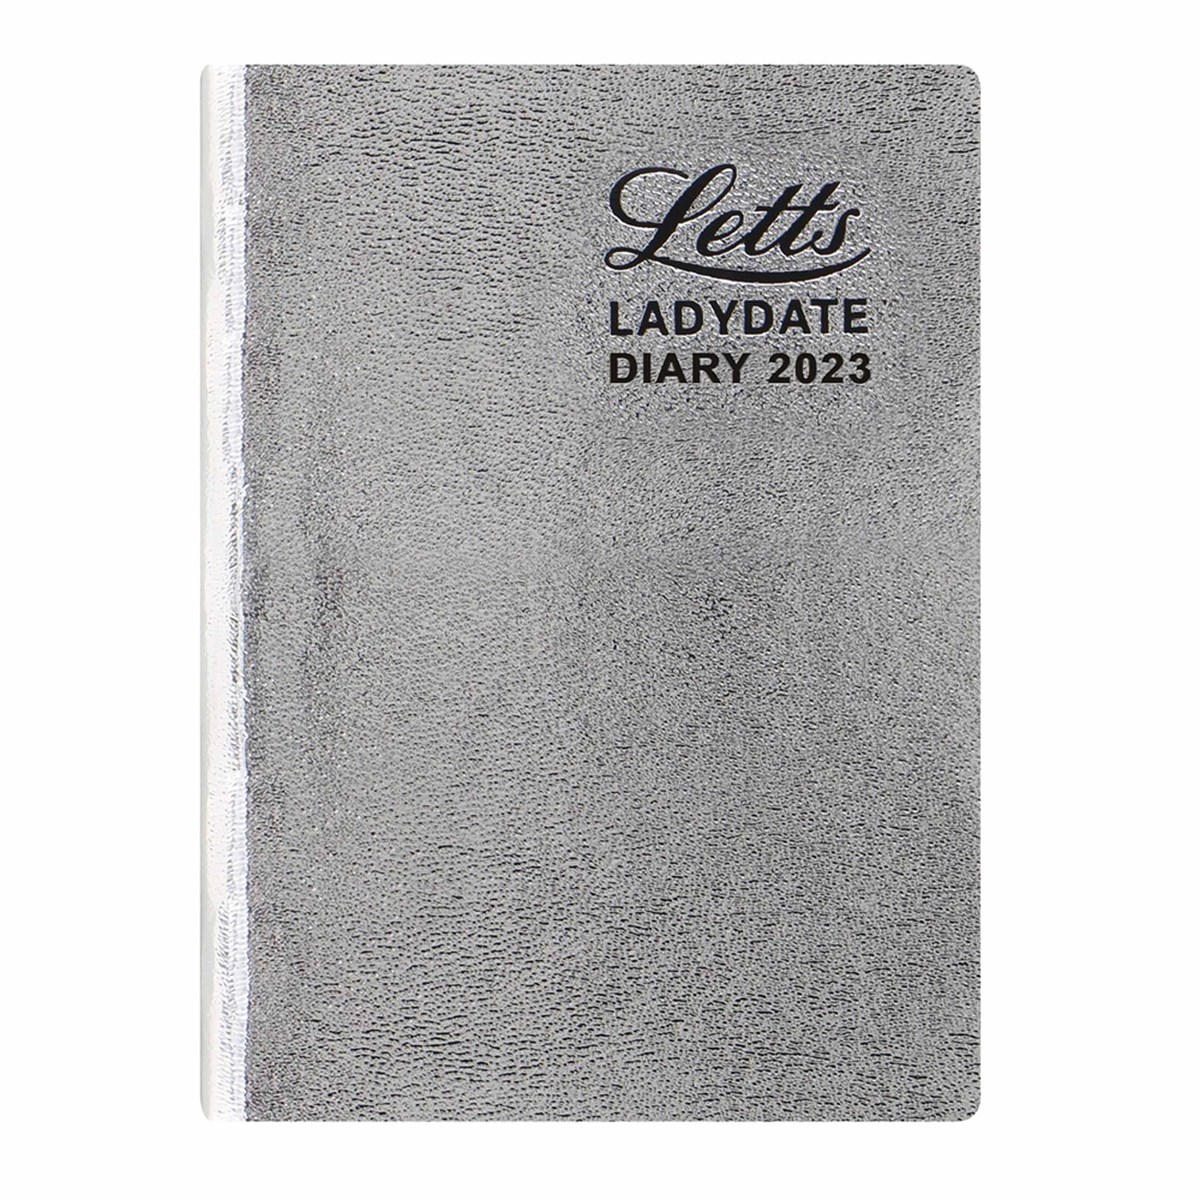 Silver Ladydate A7 Diary 2023